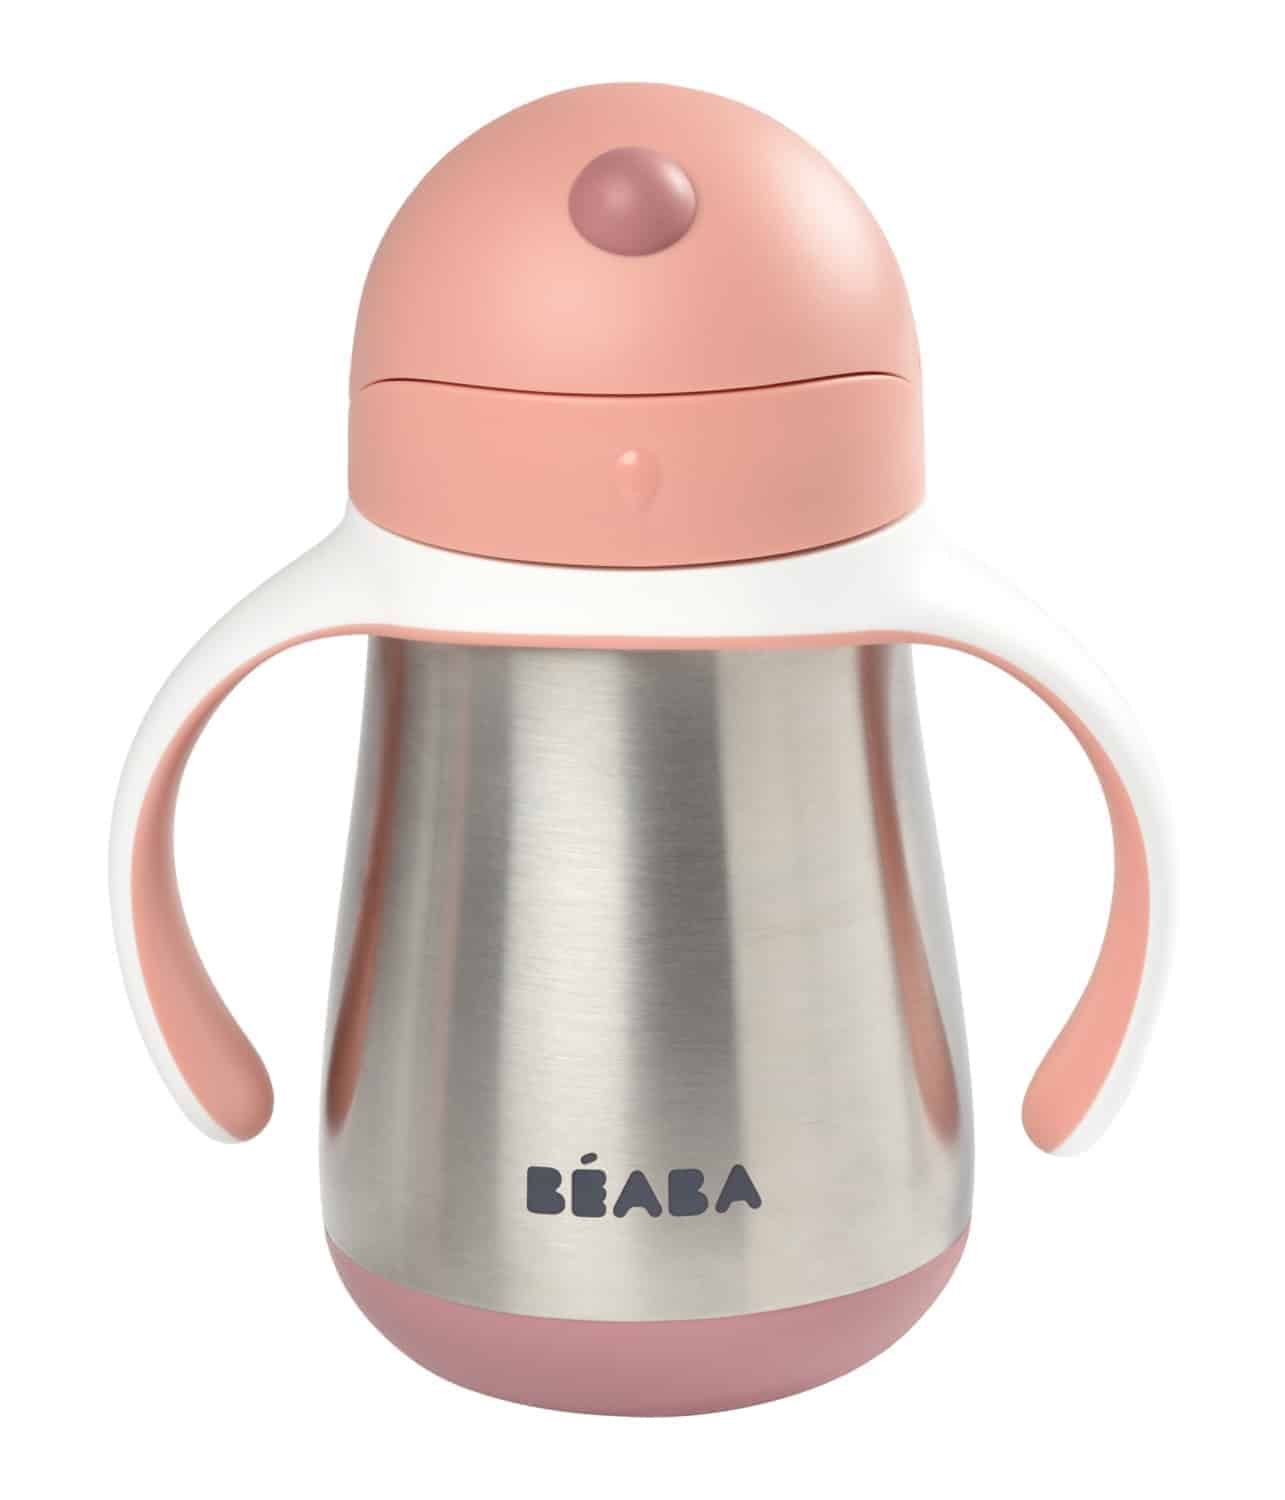 Beaba 250ml Stainless Steel Straw Cup - Vintage Pink (913482)